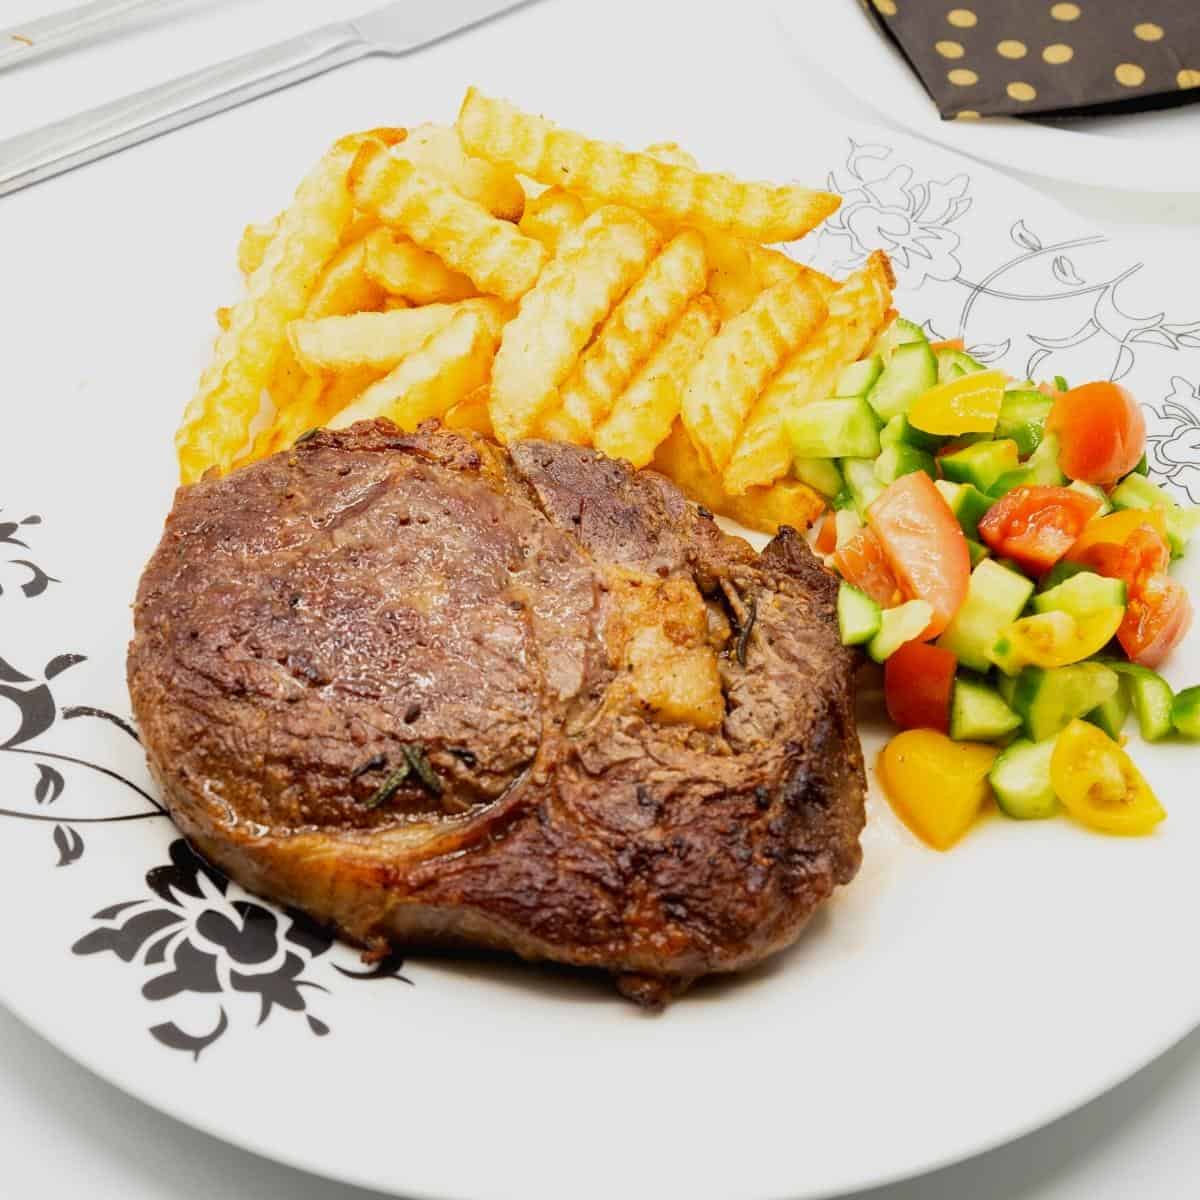 Steak on a plate with fries and salad.